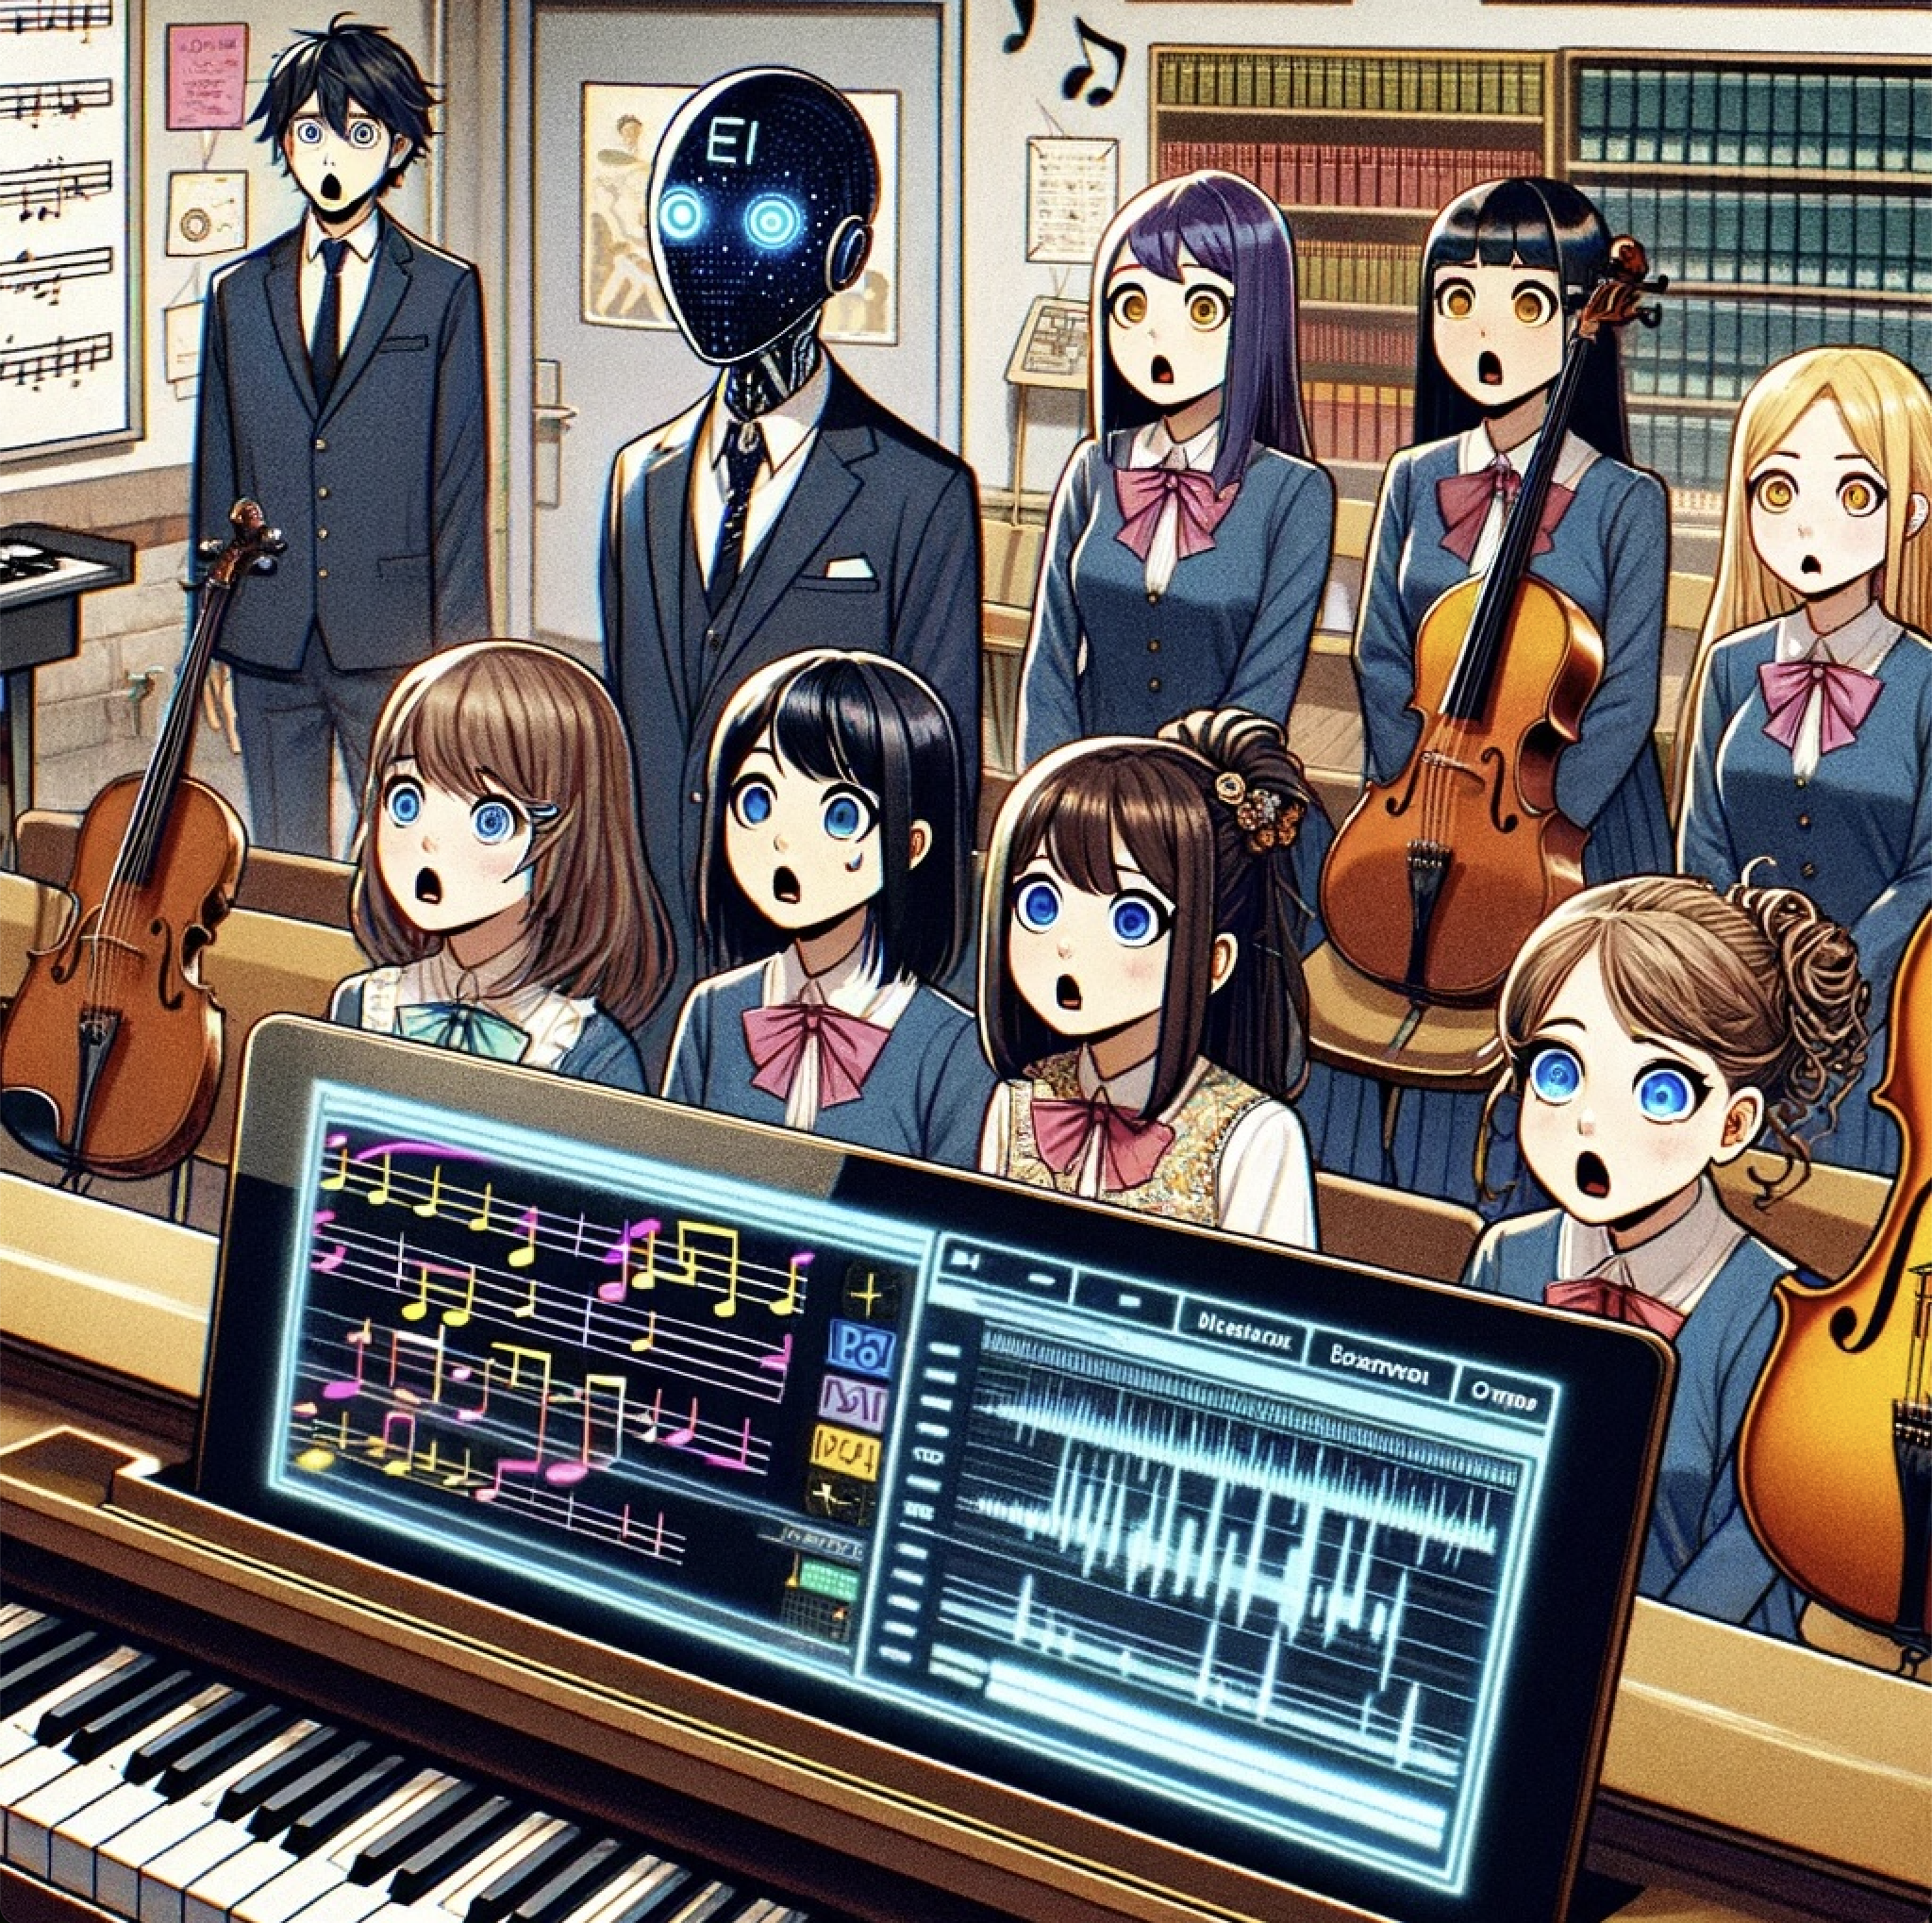 An anime-style illustration showing eight people standing in a classroom, with expressions of fear and surprise. There is also a droid amongst the group of people wearing a three-piece suit. They are surrounded by musical instruments including violins and keyboards.